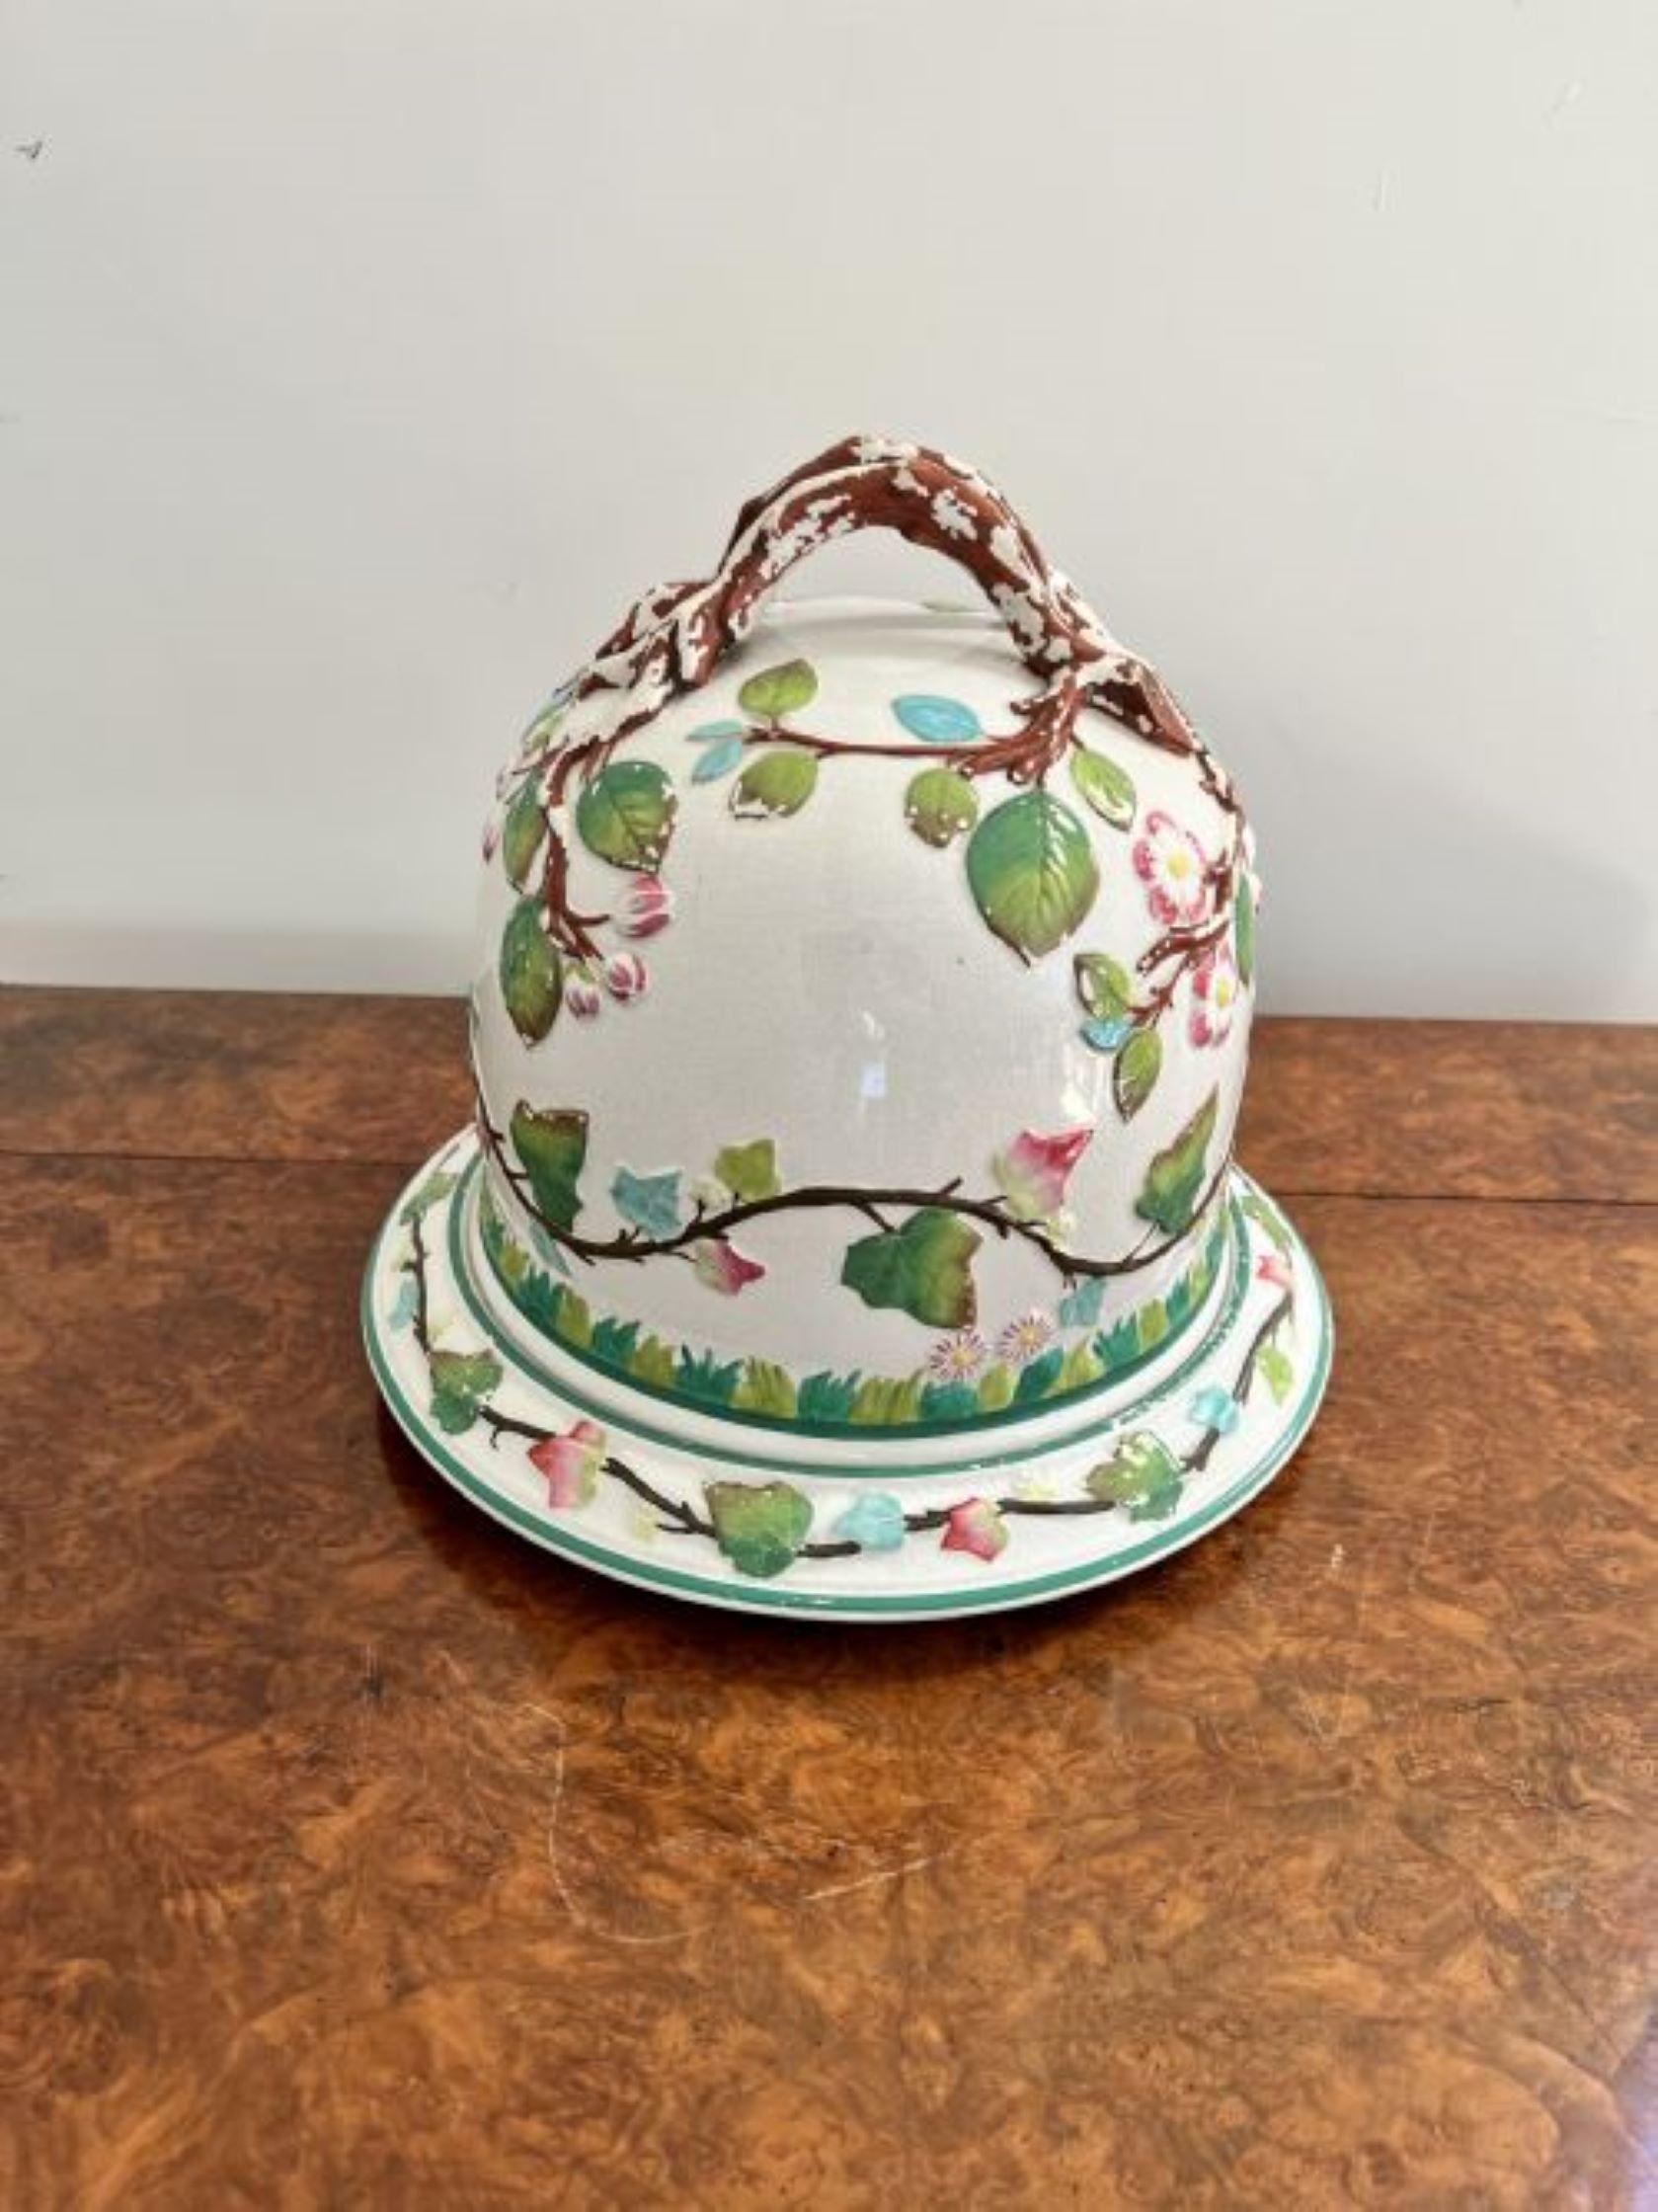 Stunning large antique quality Majolica cheese dish having a large quality dome shaped lift off top with a shaped handle decorated with flowers and leaves in wonderful green, pink, brown and blue colours on a circular base